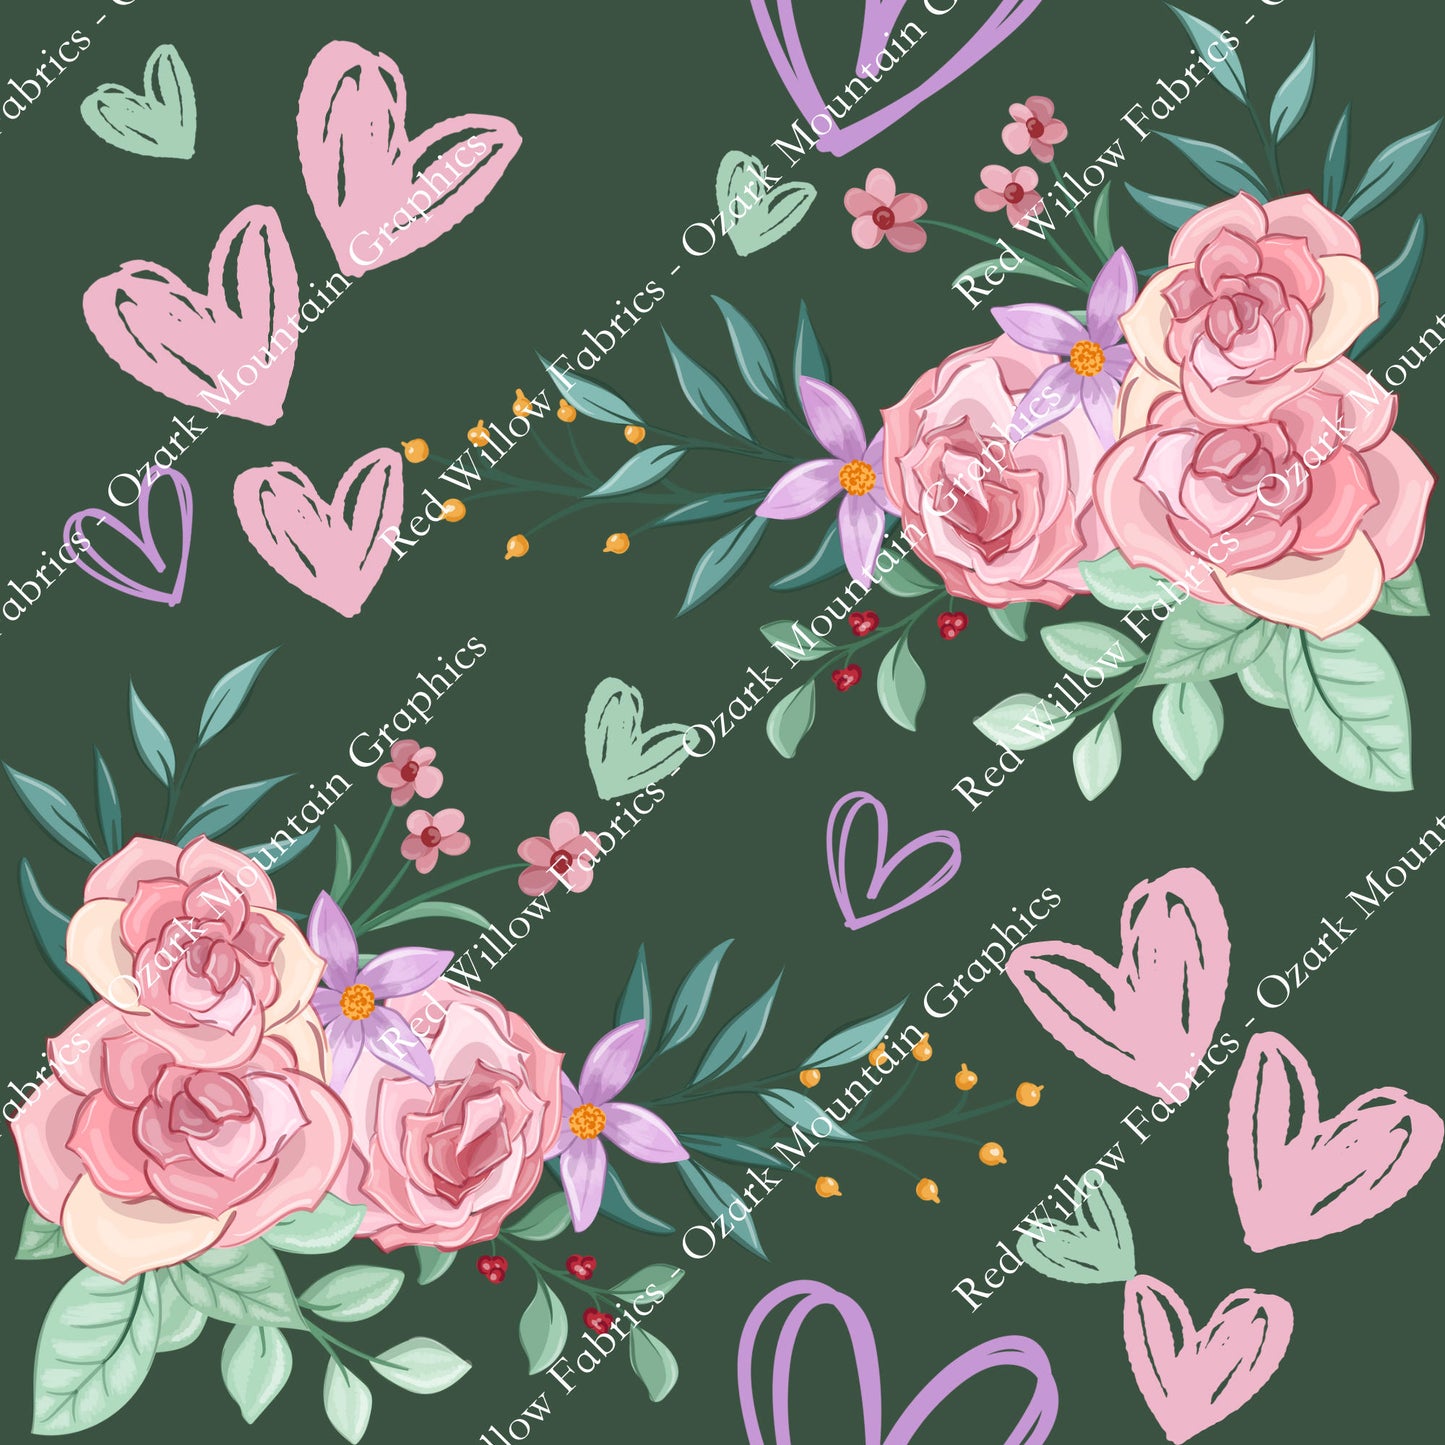 OMG - Watercolor Floral Hearts Pink